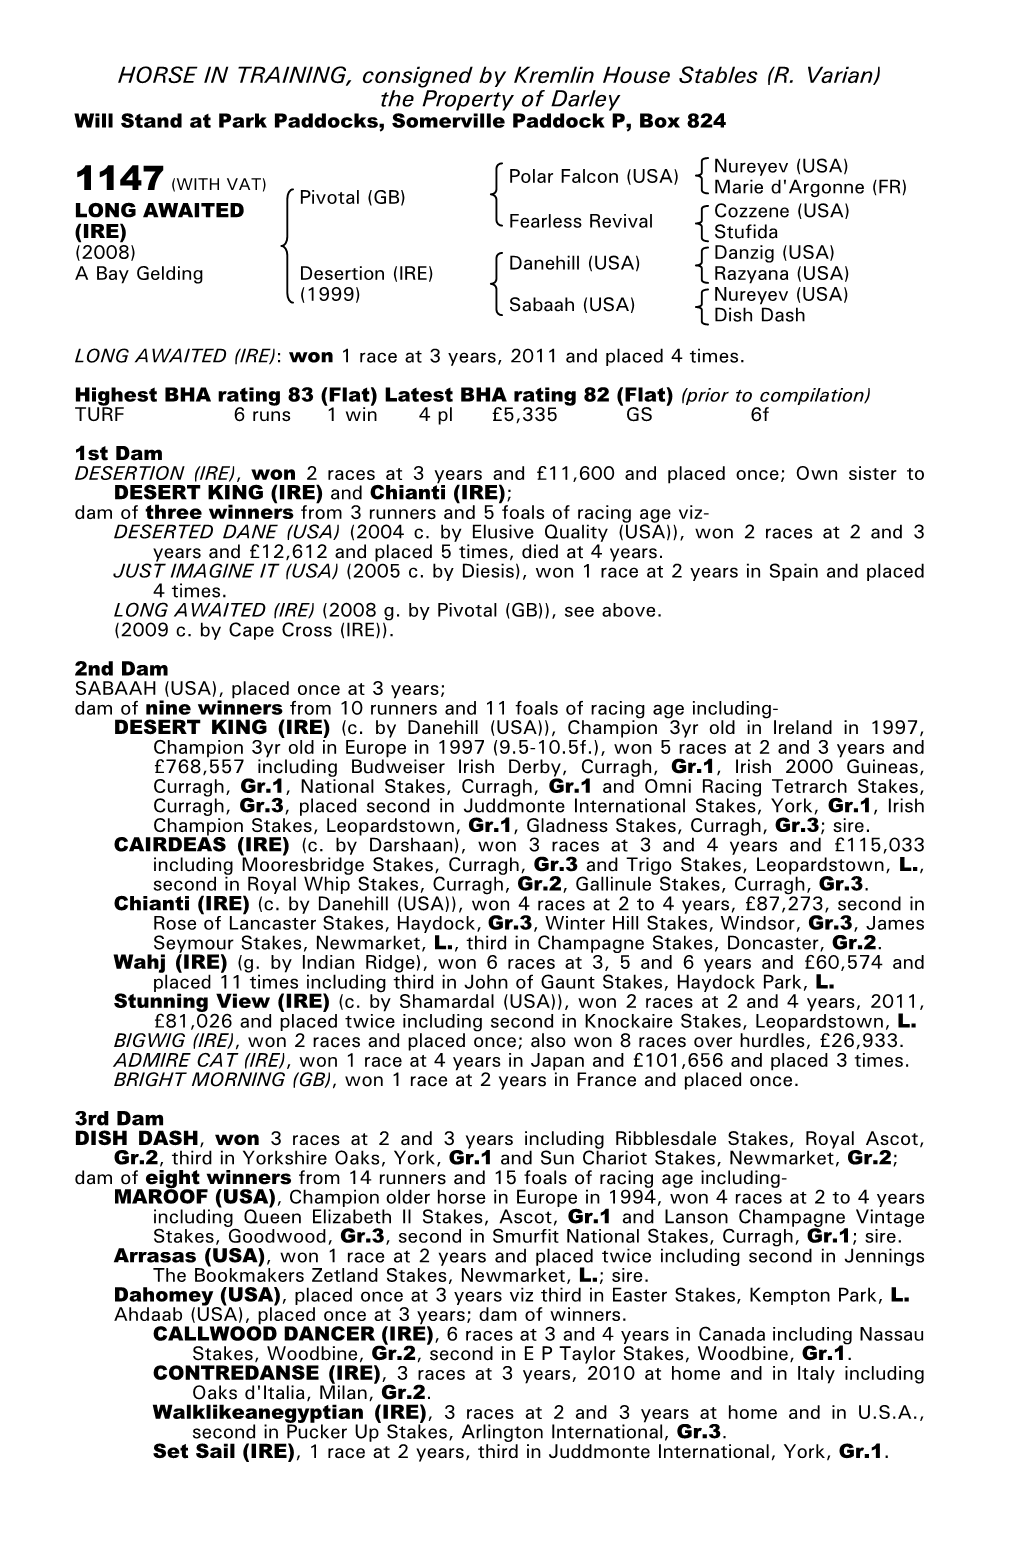 HORSE in TRAINING, Consigned by Kremlin House Stables (R